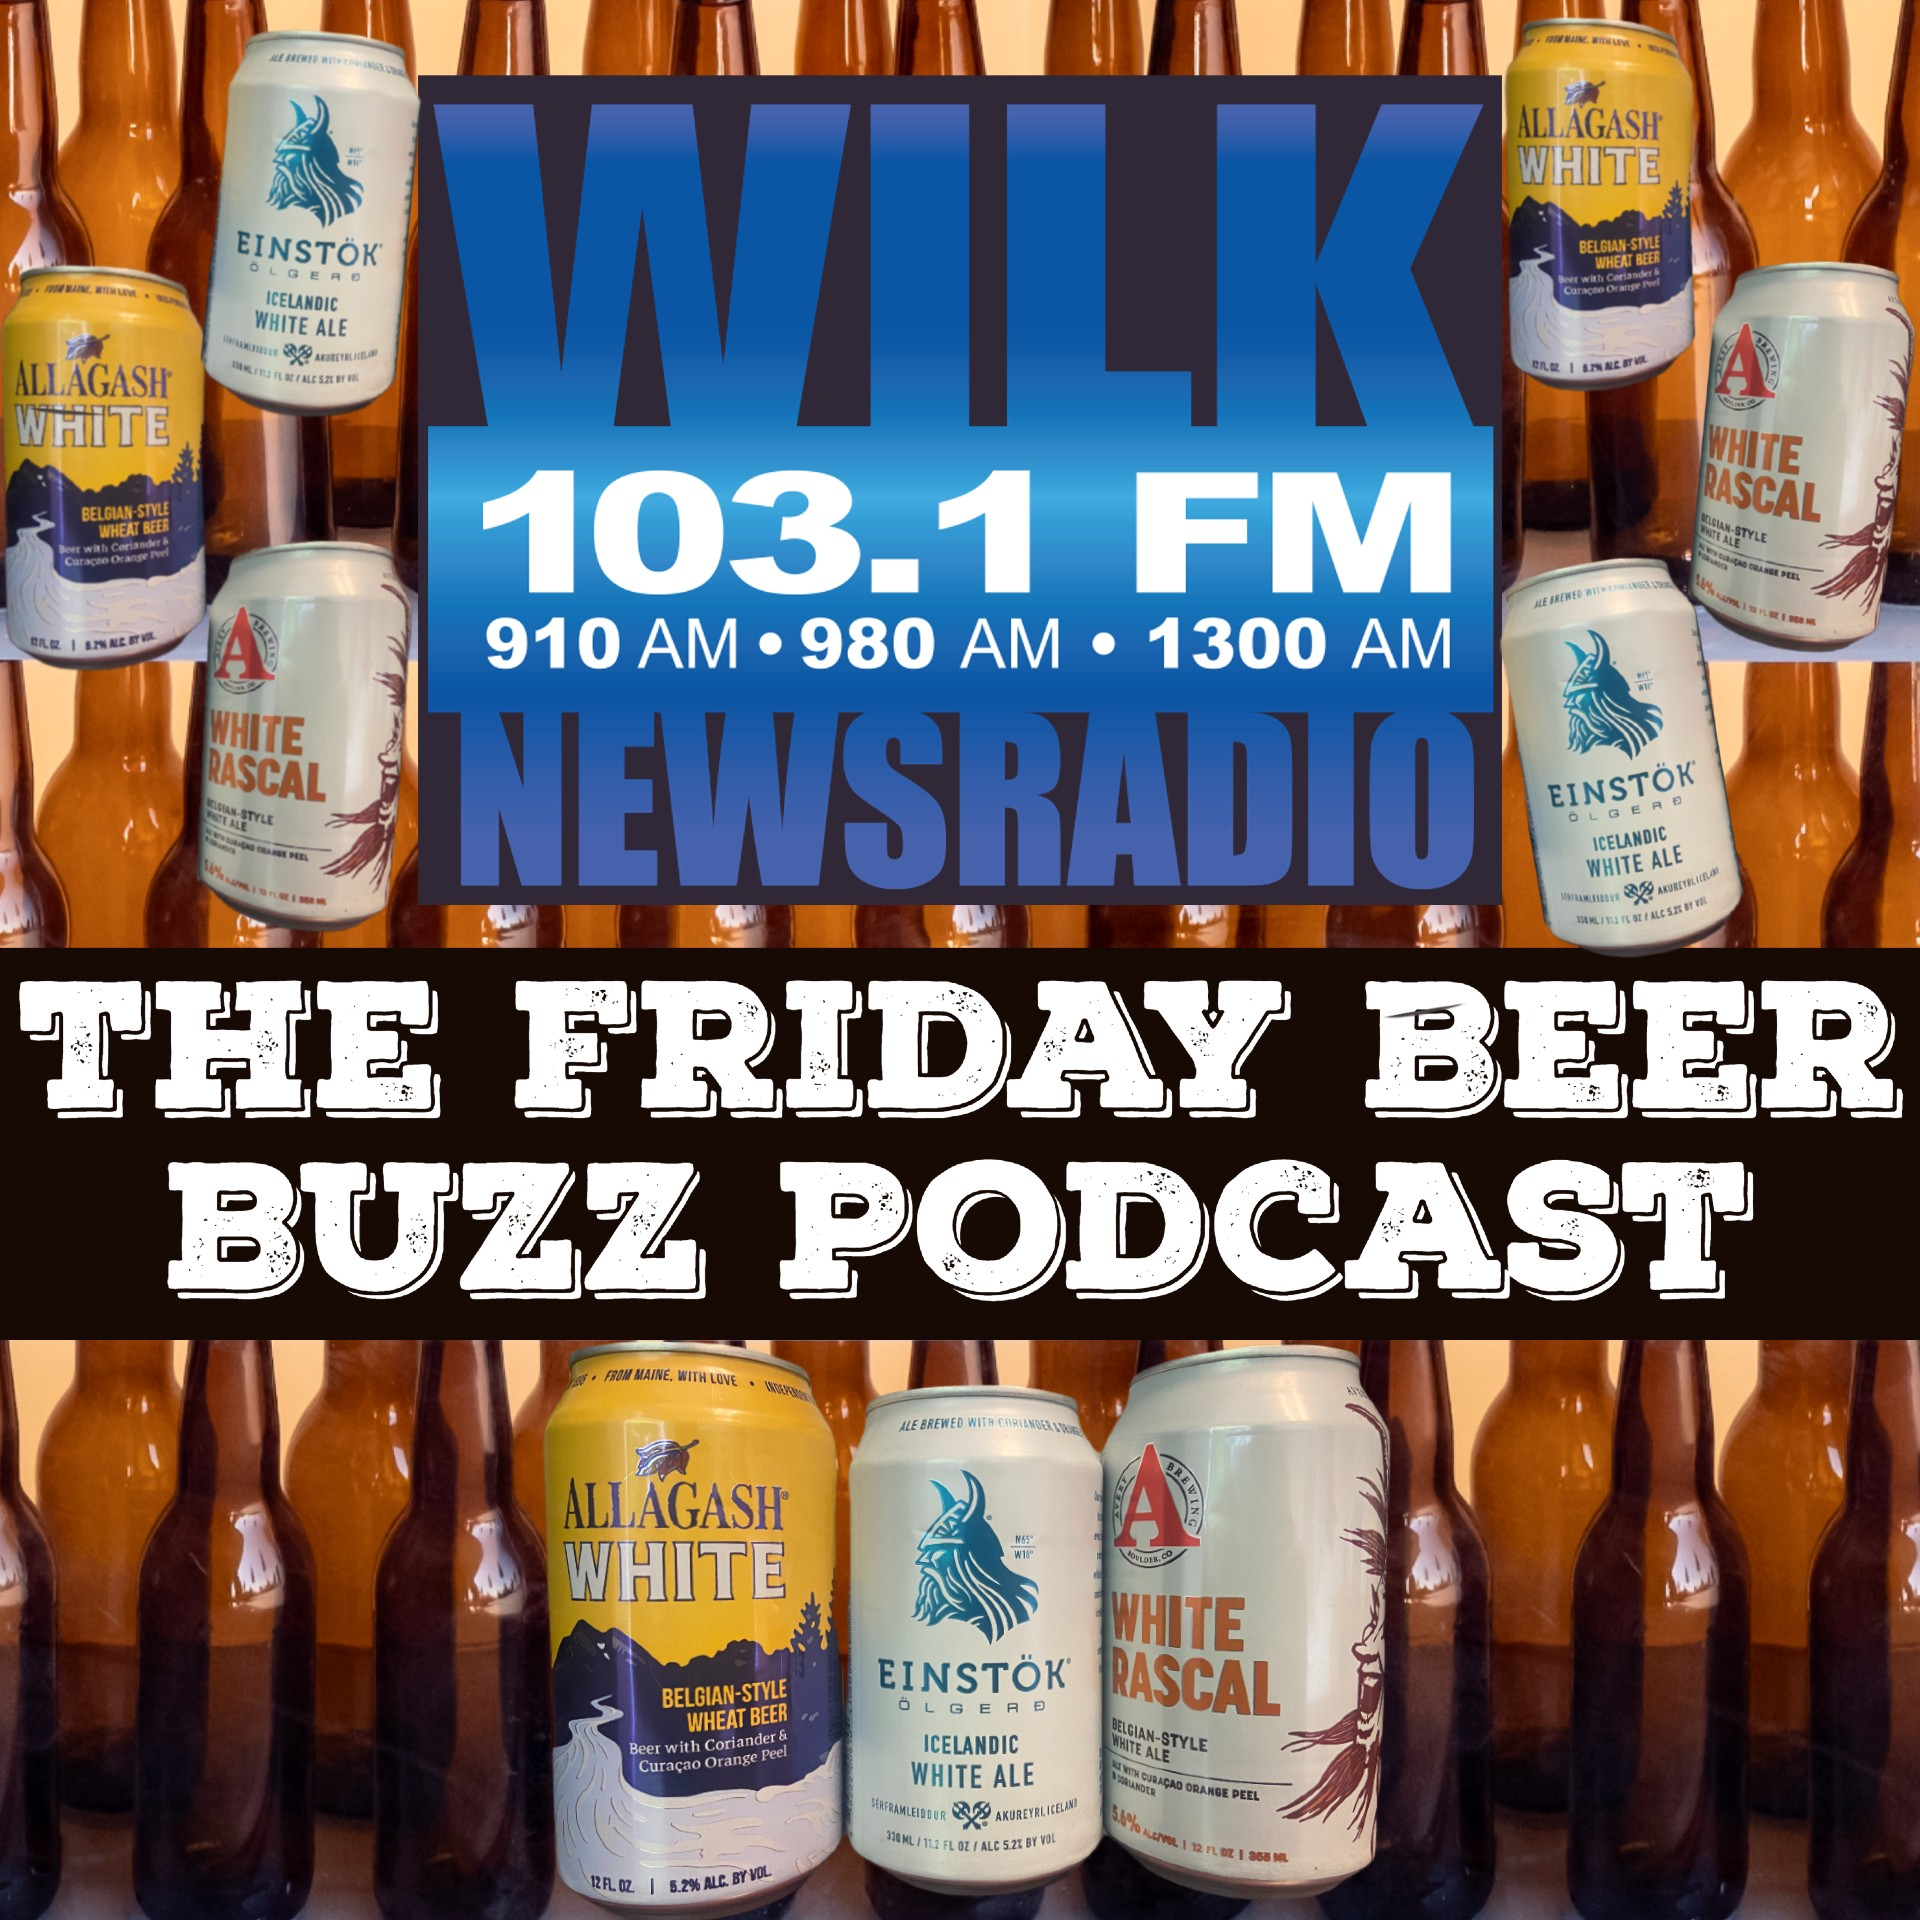 Three Belgian White brews on this Friday Beer Buzz!